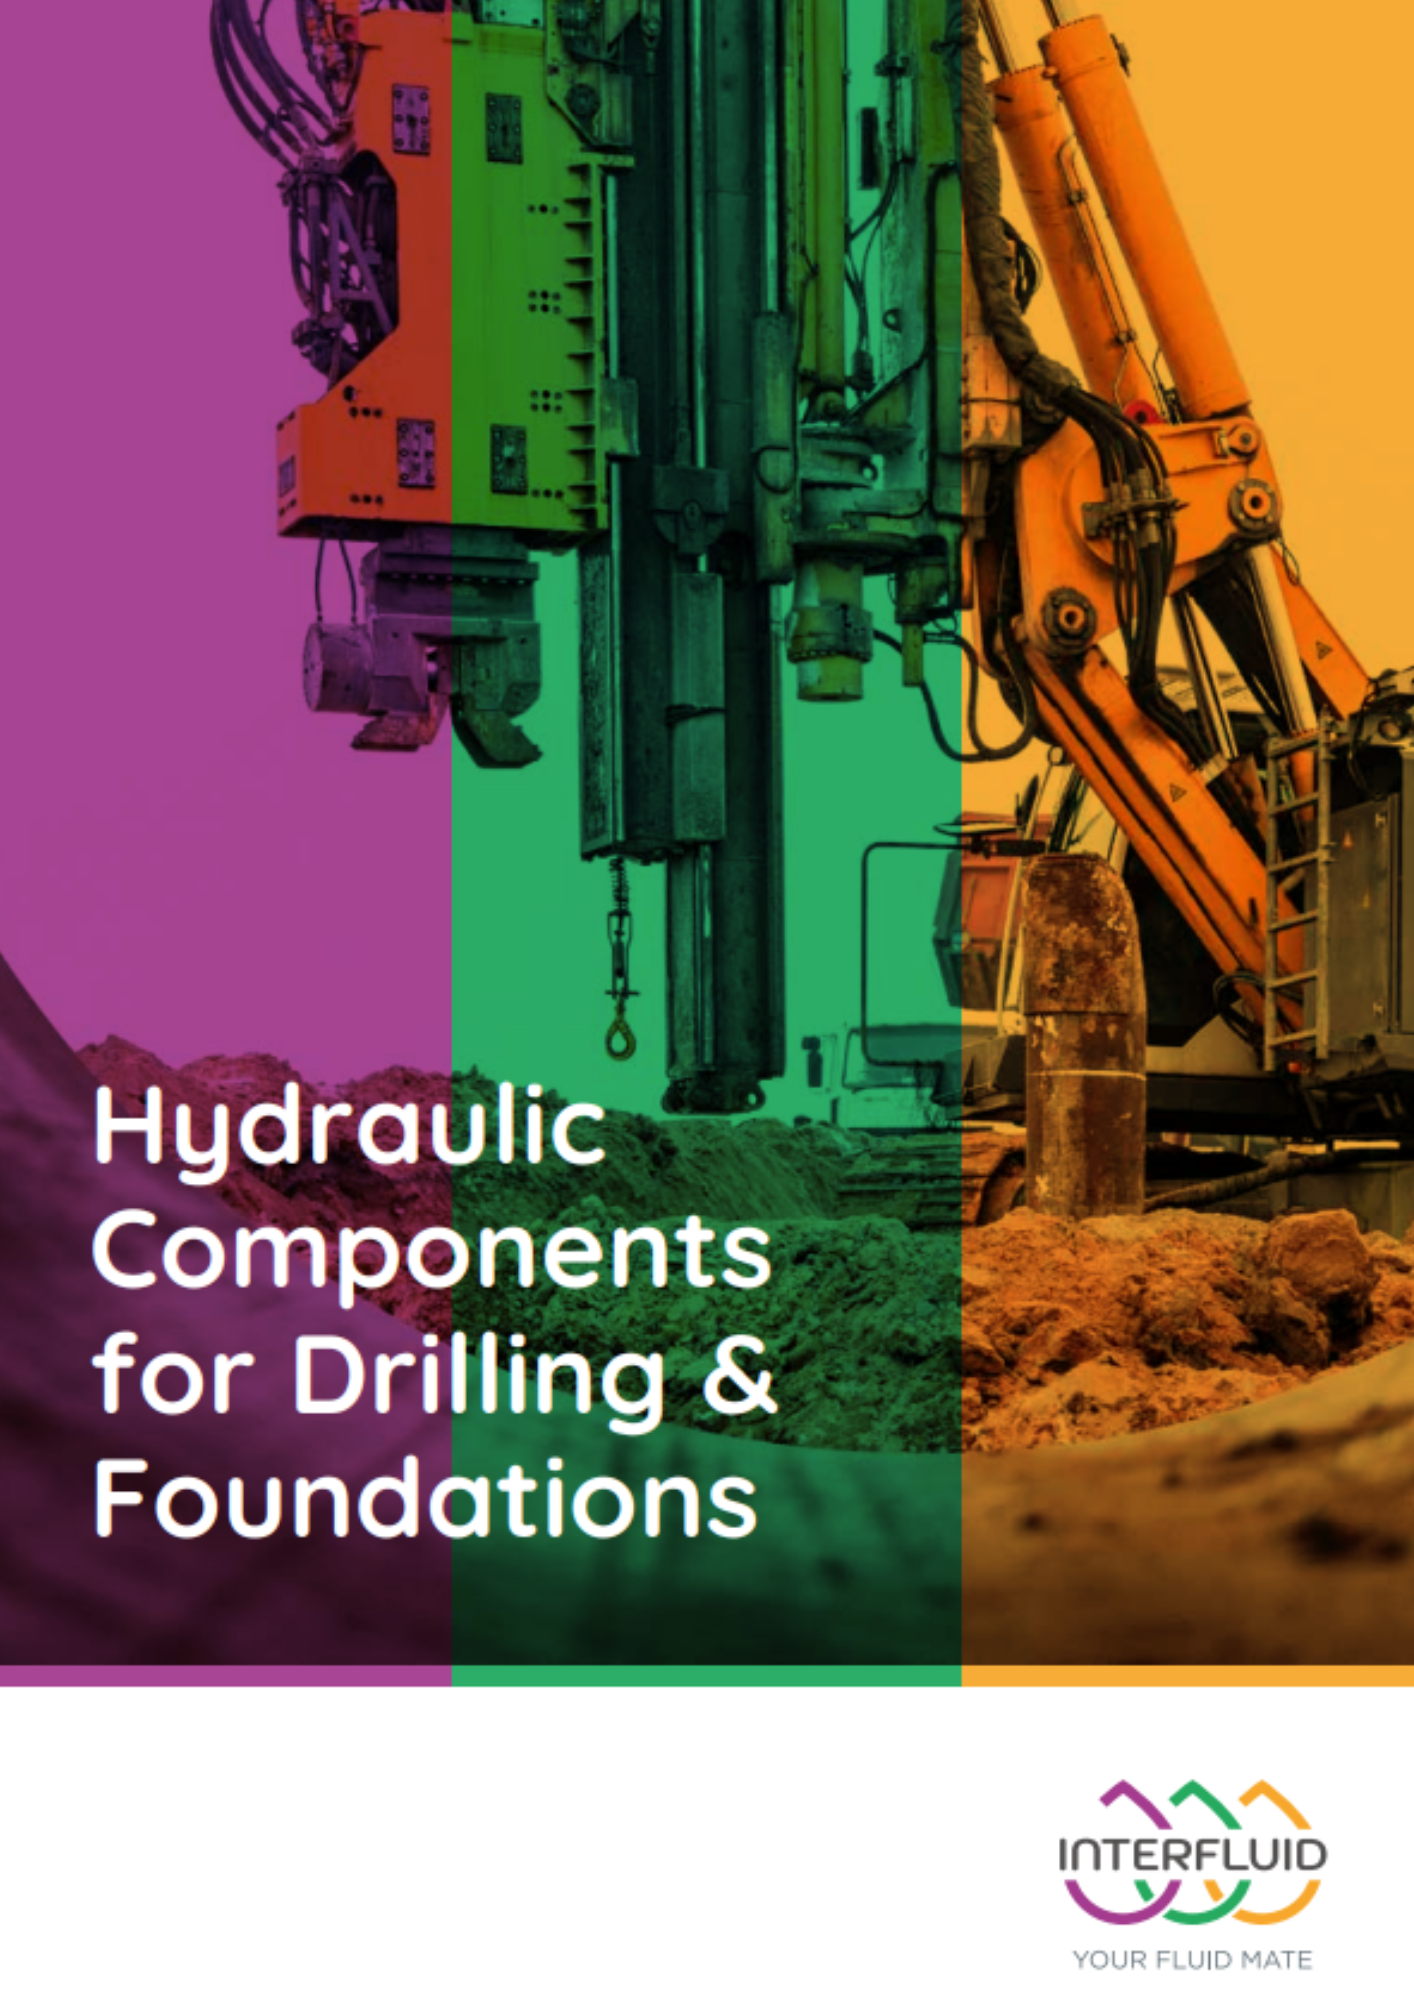 Hydraulic components for Drilling & Foundations